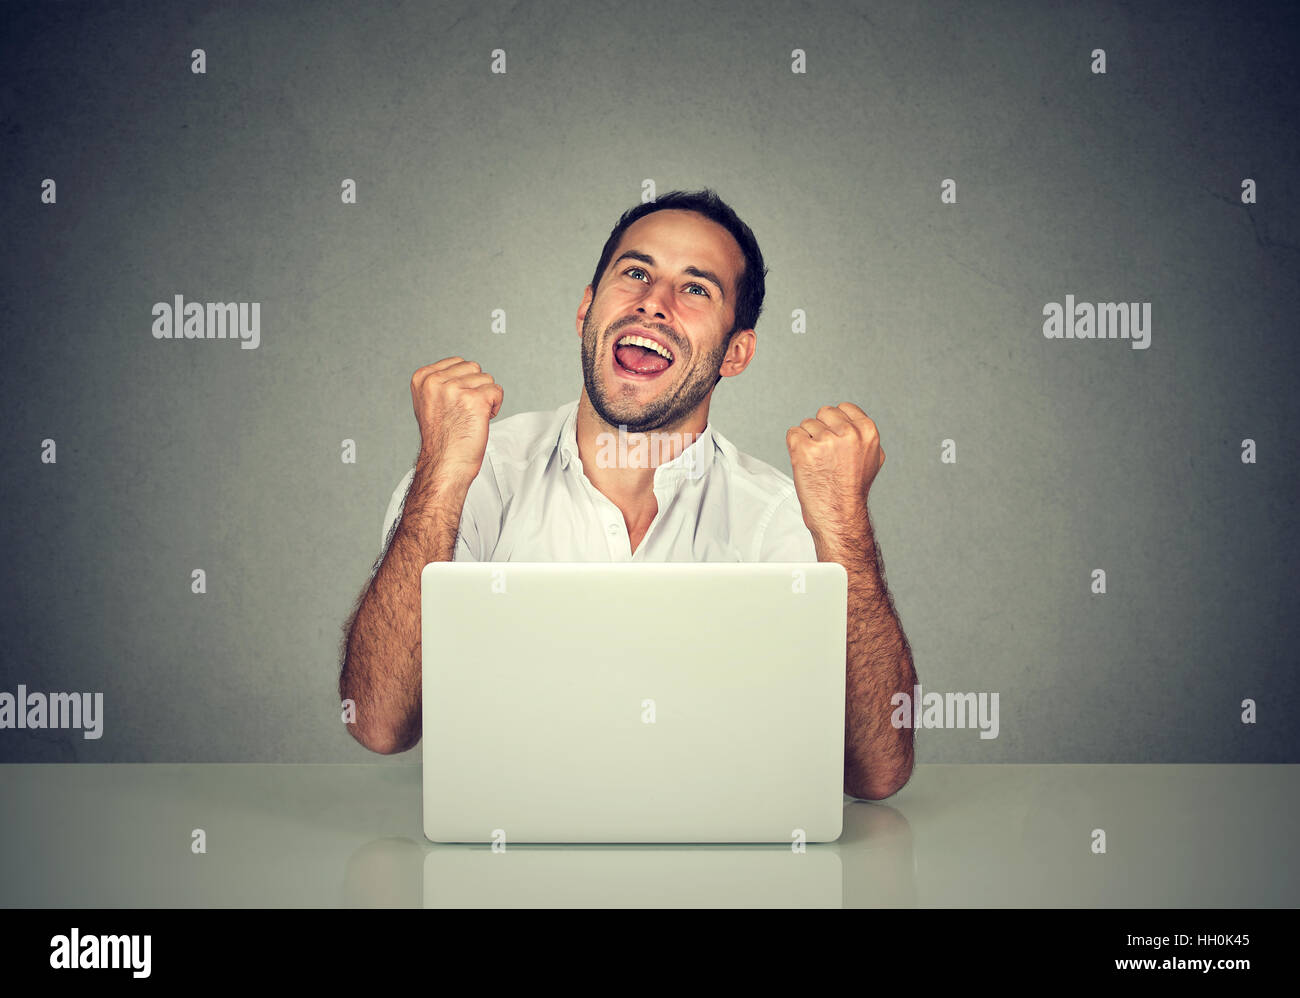 Happy business man achieving his goal and pumping fists celebrating success Stock Photo